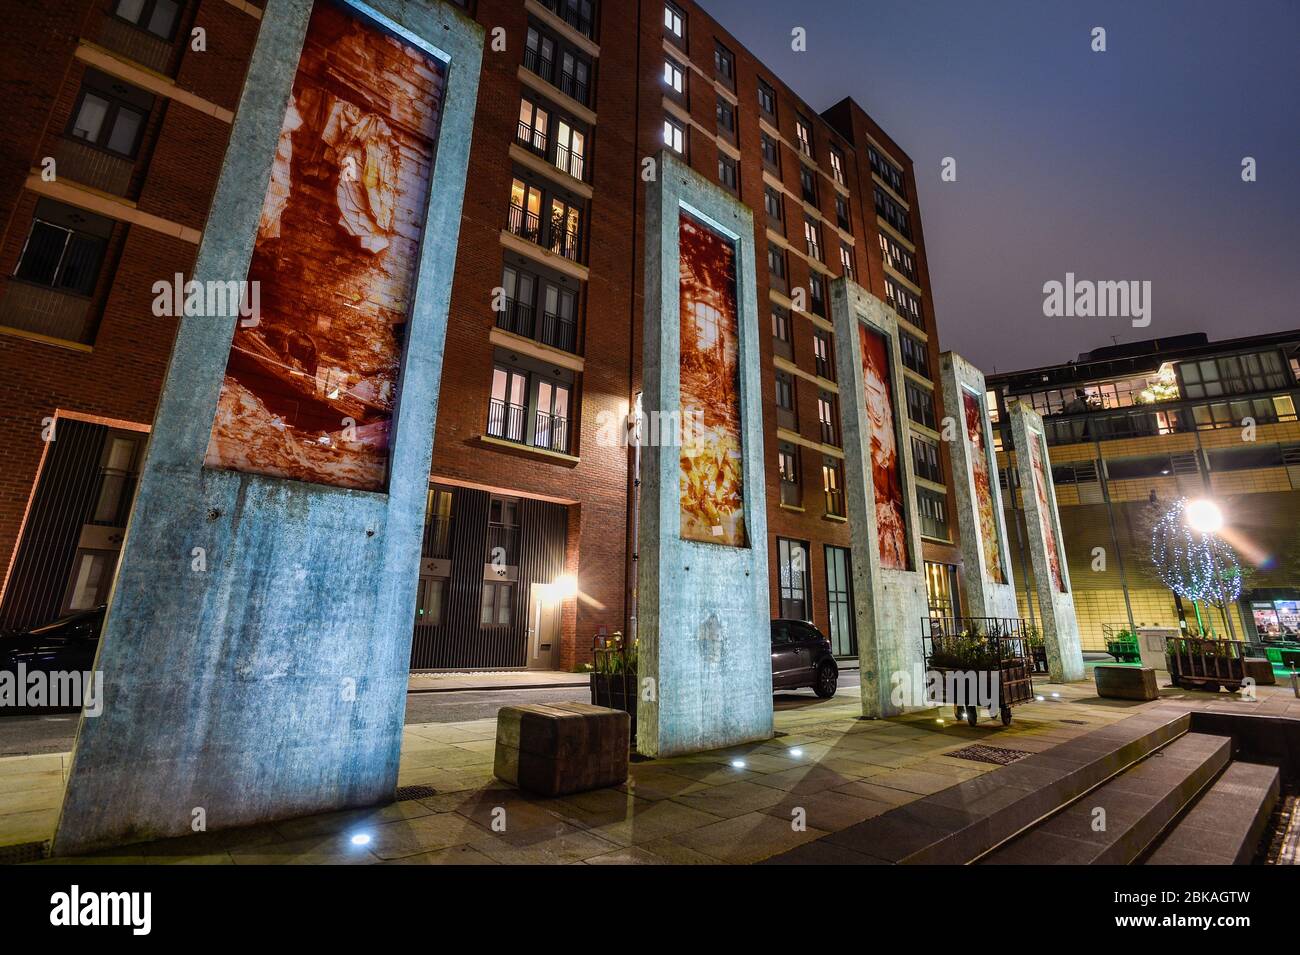 Blick auf Cutting Room Square, Ancoats, Manchester. Stockfoto